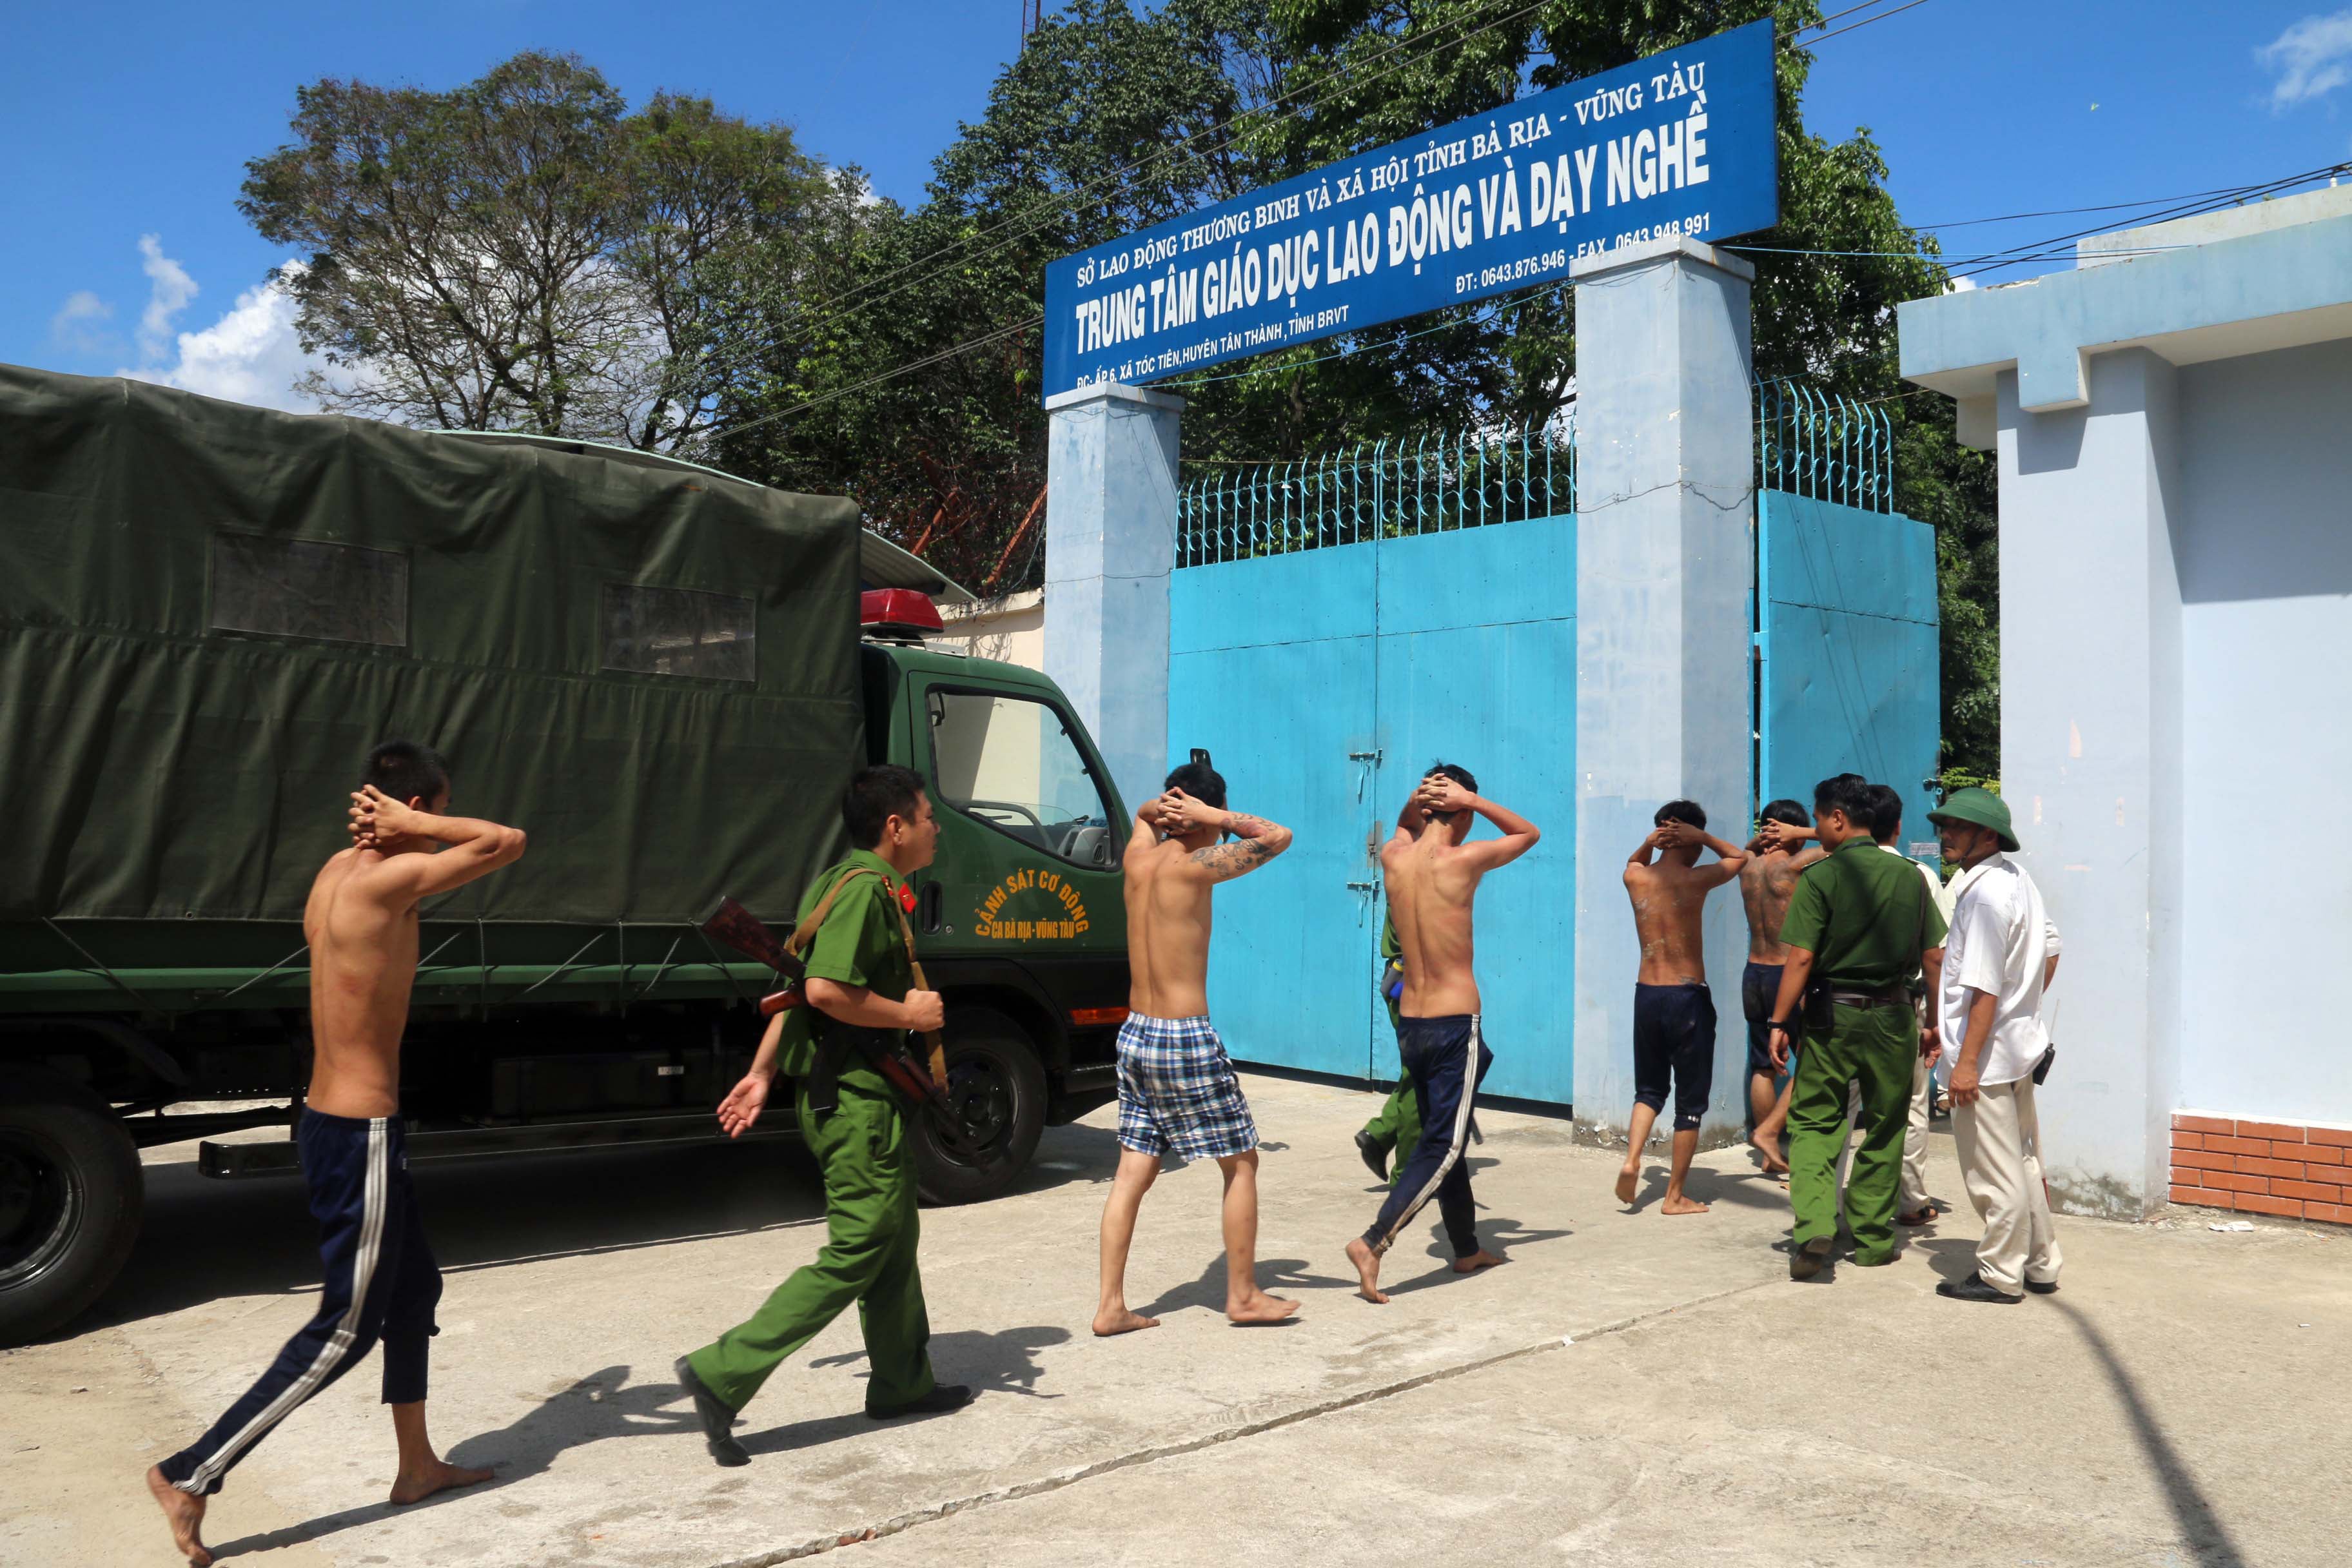 This picture taken on 9 November 2016 shows recaptured inmates, who escaped from a drug rehabilitation centre, being escorted by police back to their rehab centre in the in the southern province of Ba Ria-Vung Tau following a mass breakout